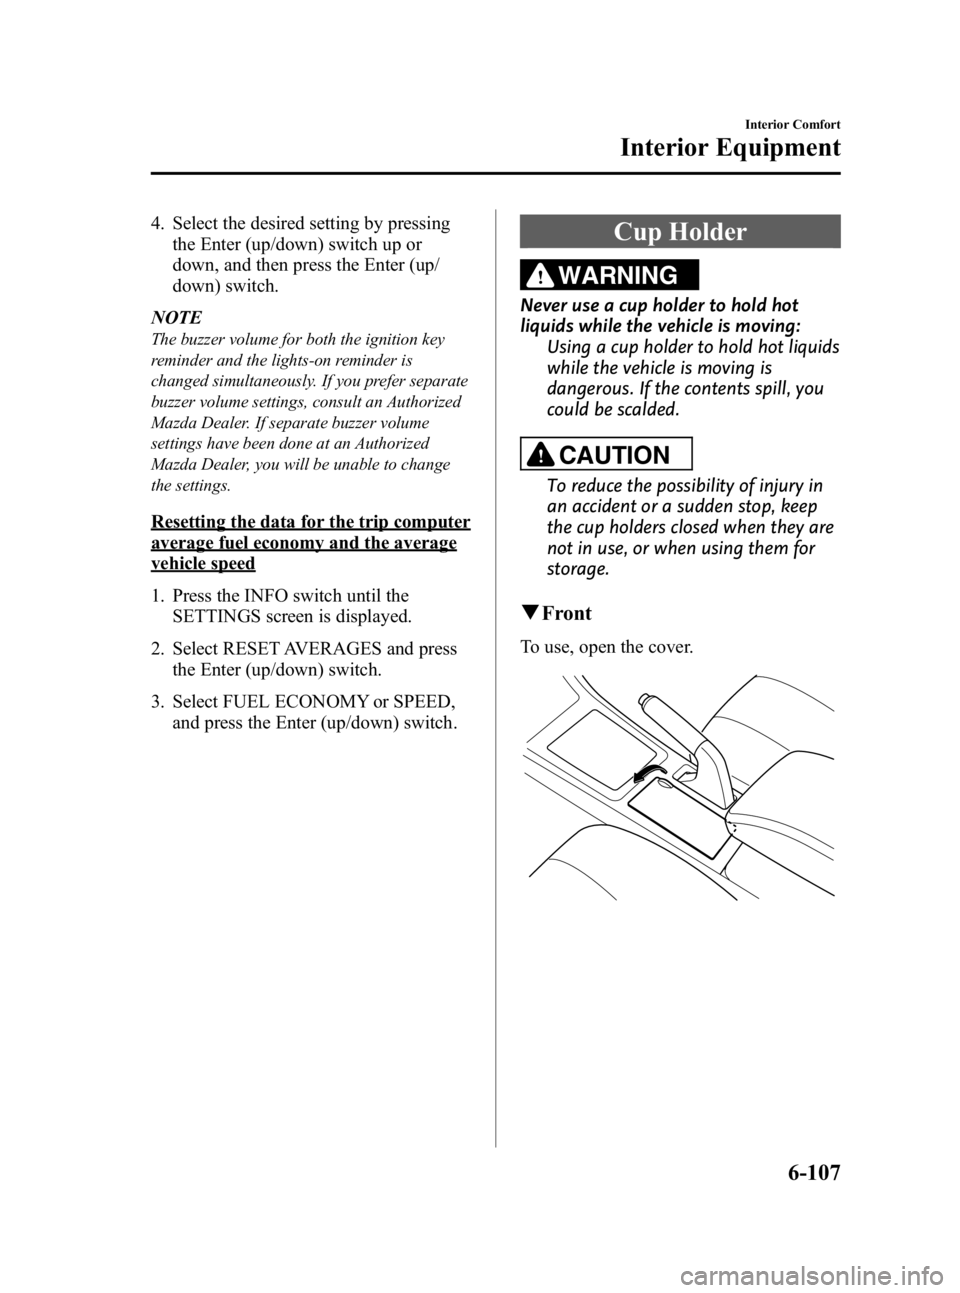 MAZDA MODEL 3 5-DOOR 2010  Owners Manual Black plate (337,1)
4. Select the desired setting by pressingthe Enter (up/down) switch up or
down, and then press the Enter (up/
down) switch.
NOTE
The buzzer volume for both the ignition key
reminde